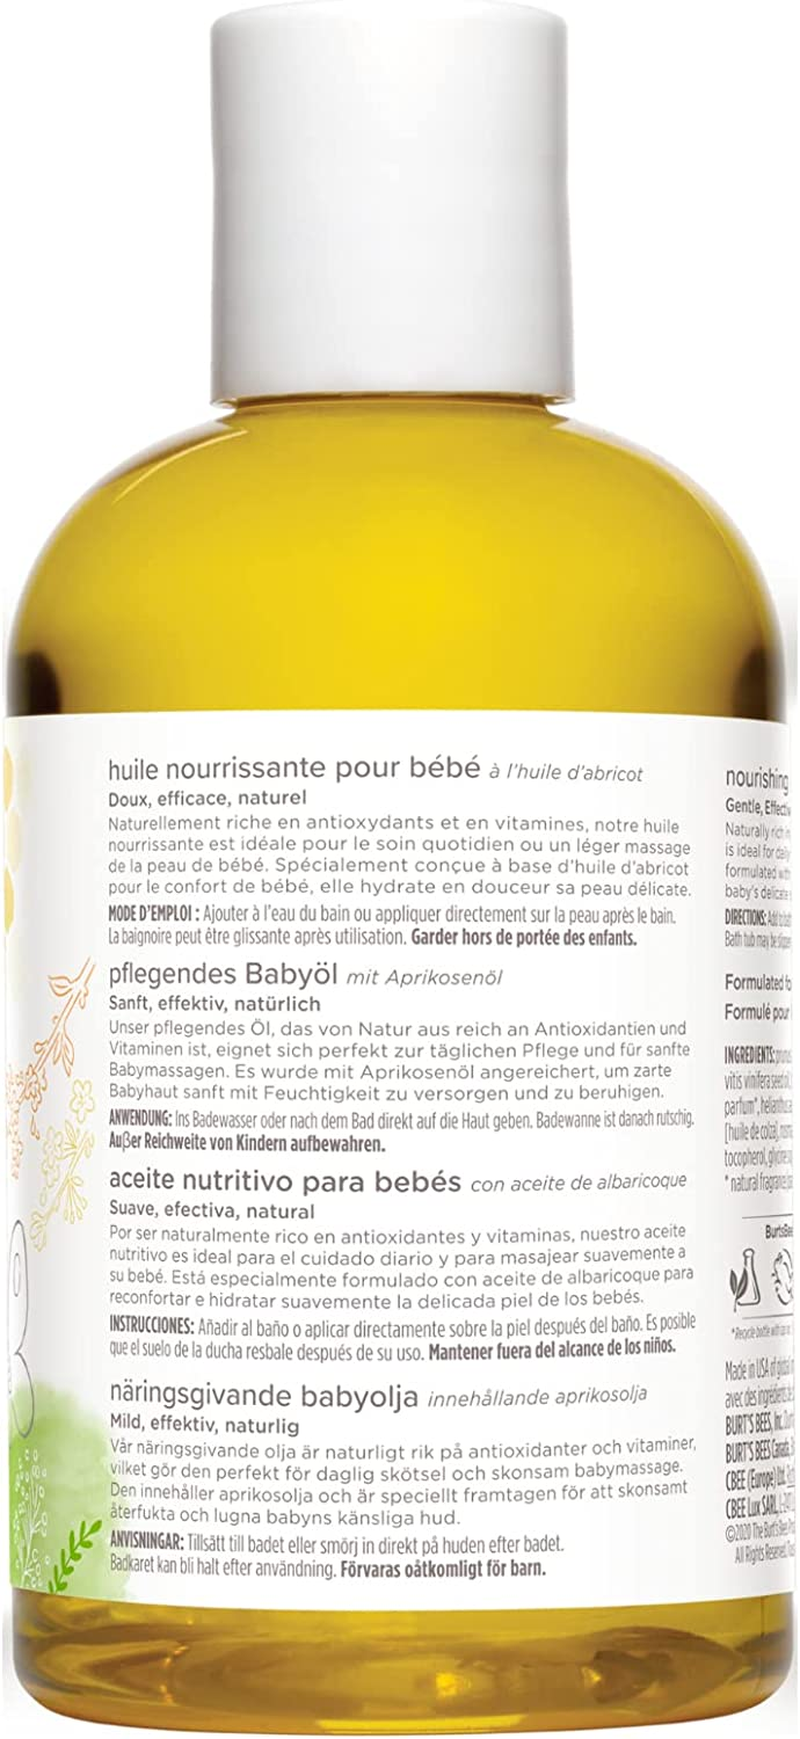 baby oil, nourishing baby moisturiser with apricot oil, paediatrician tested, 115ml